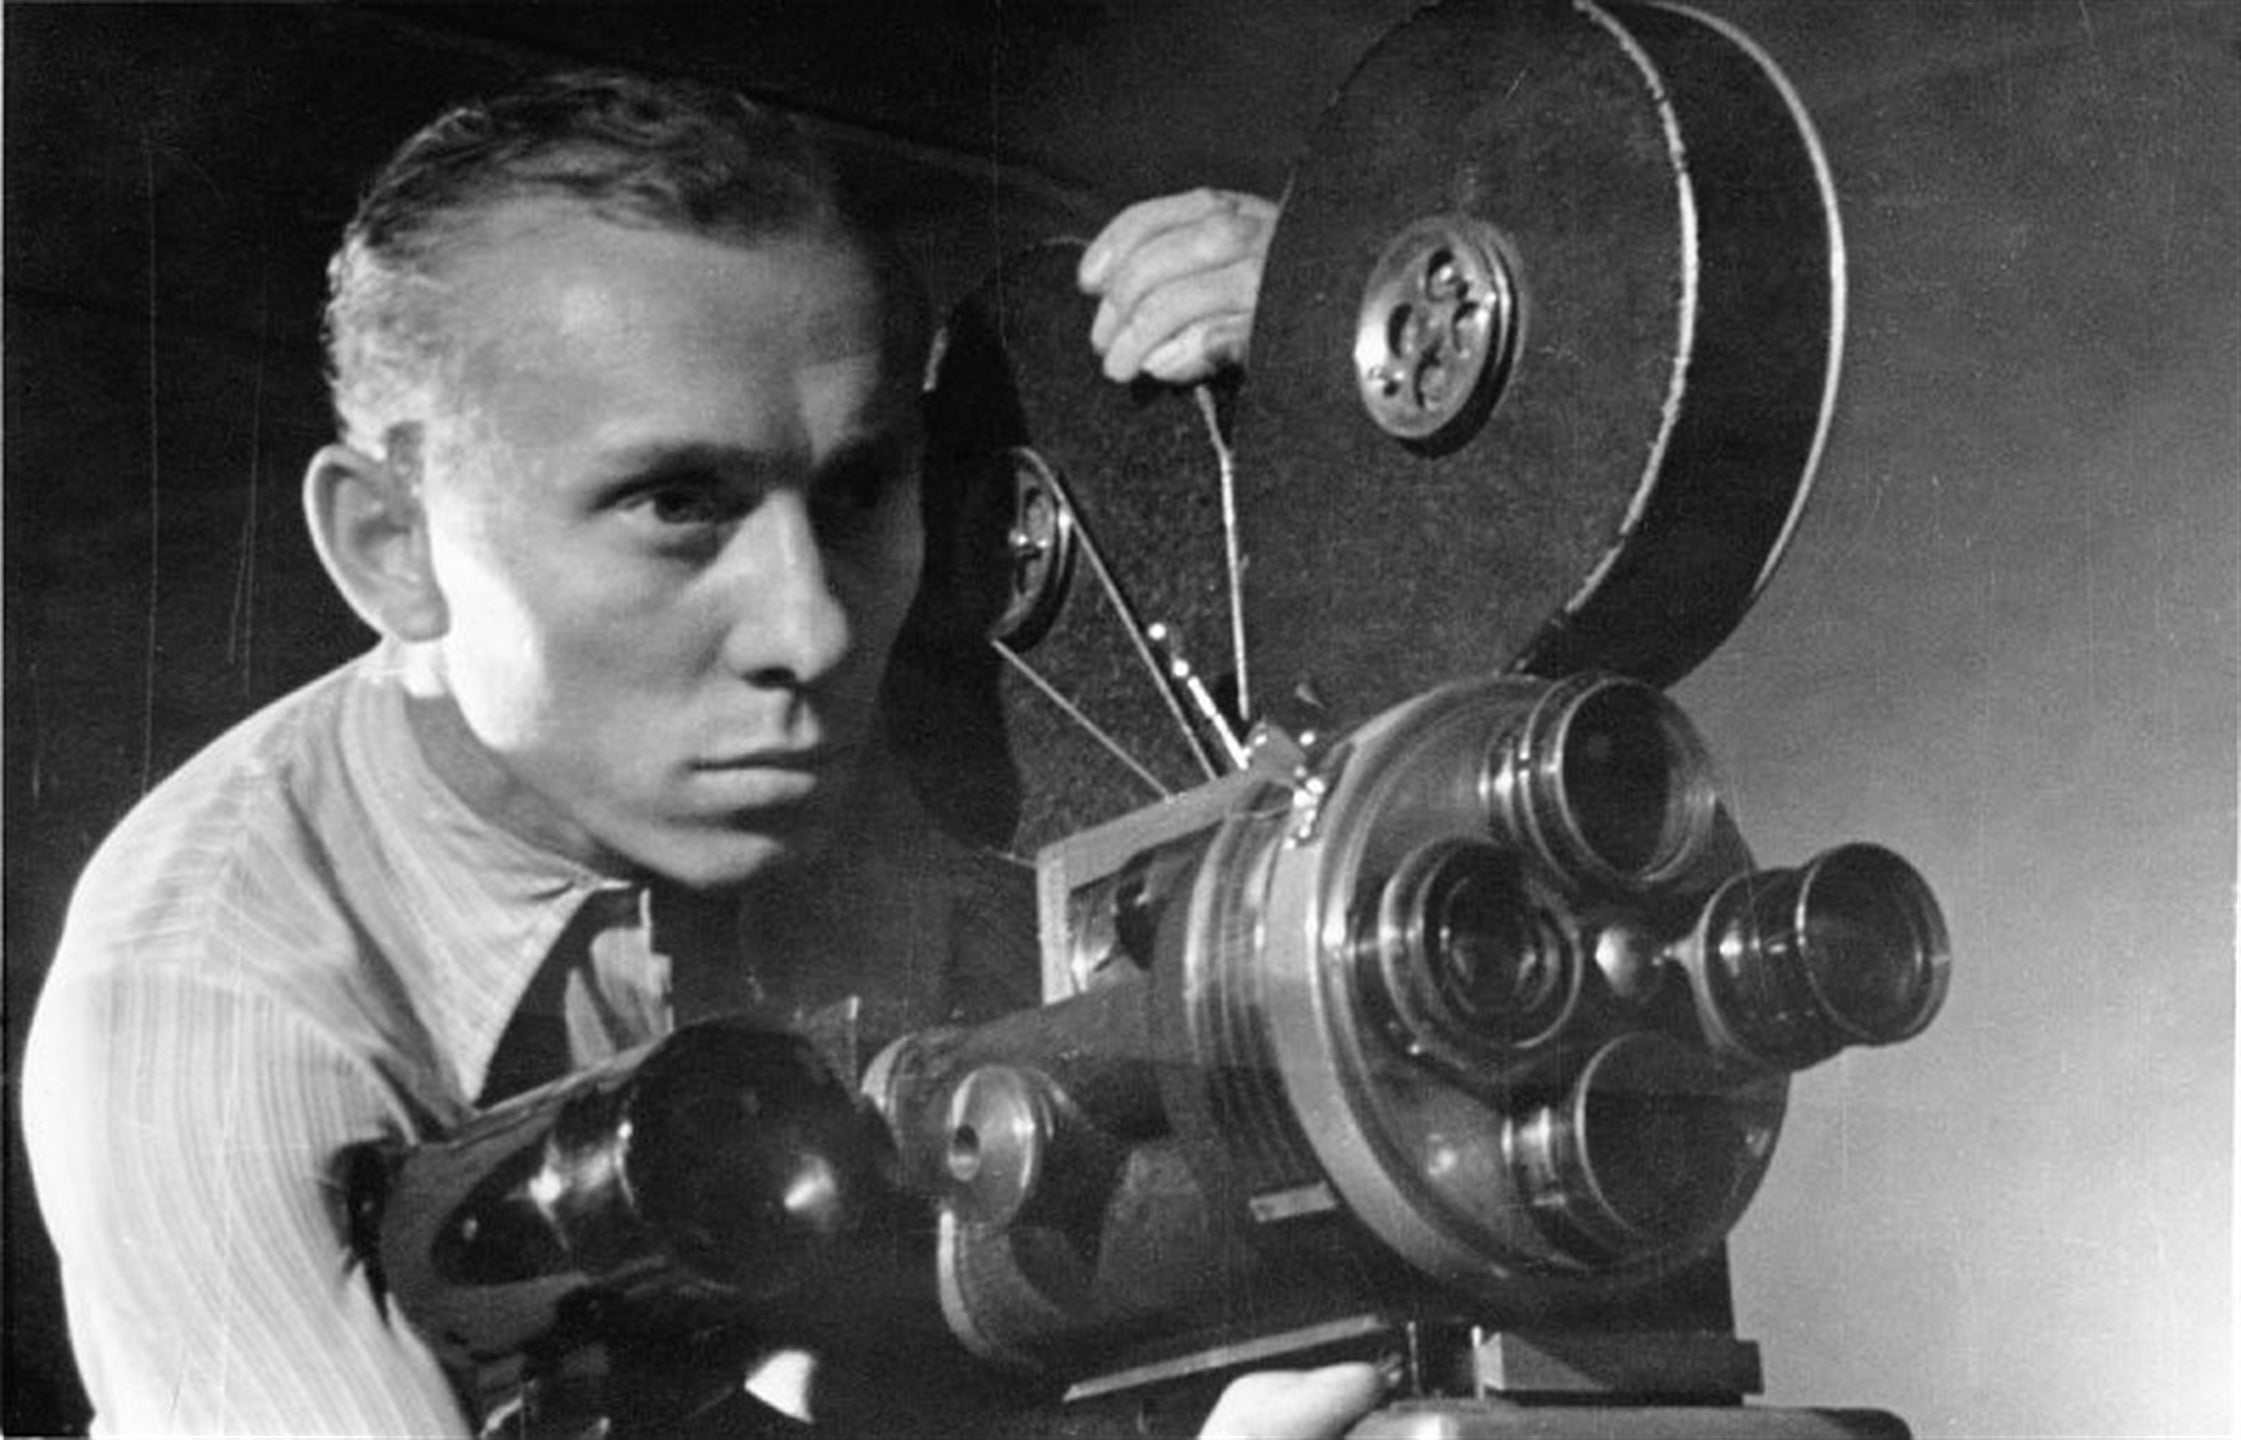 Czech Cinematography: A Legacy of Innovation and Magic